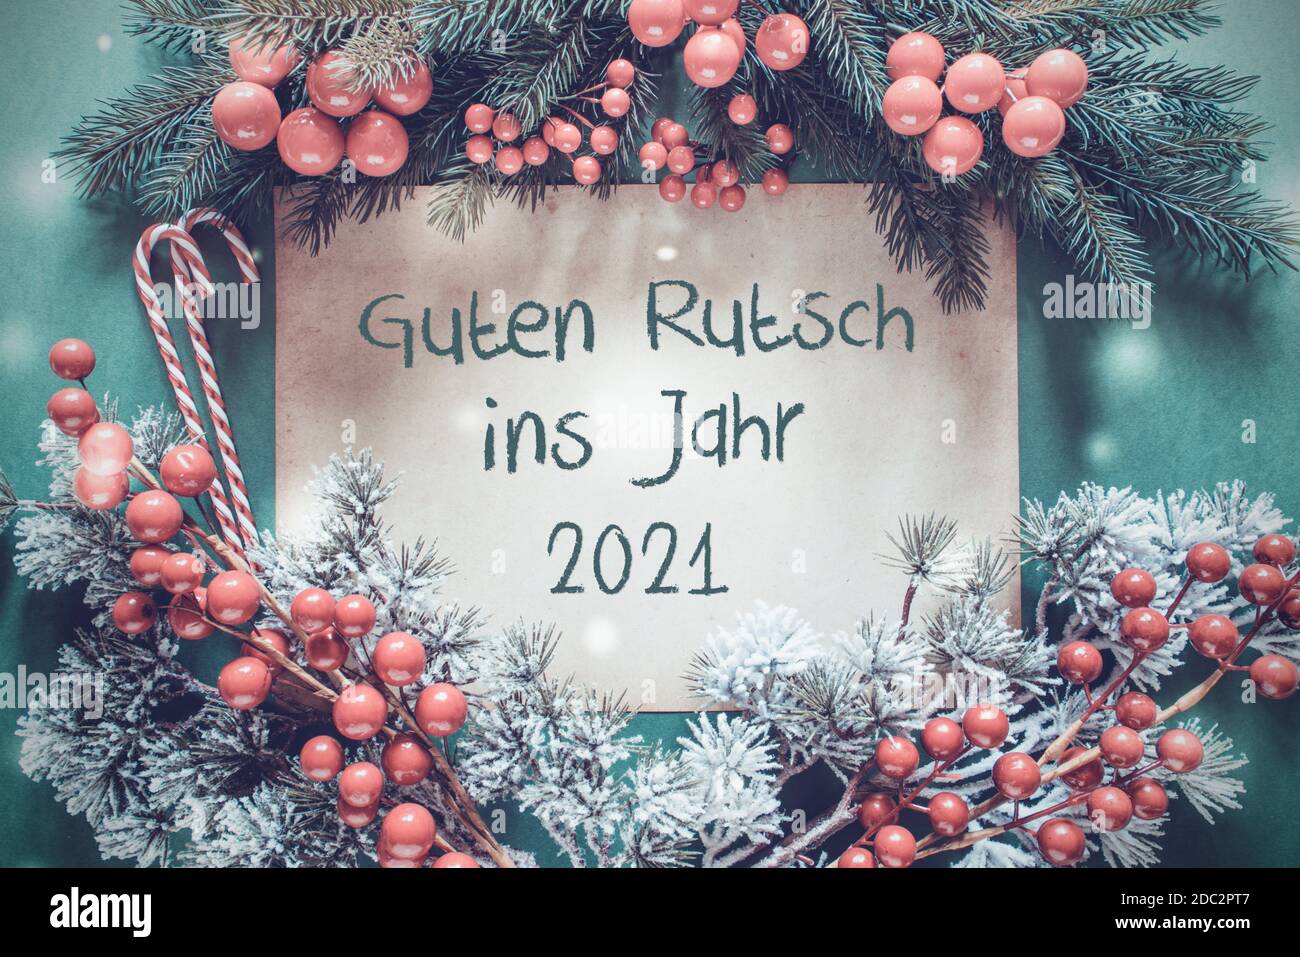 Brown Paper With German Text Guten Rutsch Ins Jahr 2021 Means Happy New Year 2021. Christmas Garland With Fir Tree Branch And Red Decoration. Green Ba Stock Photo